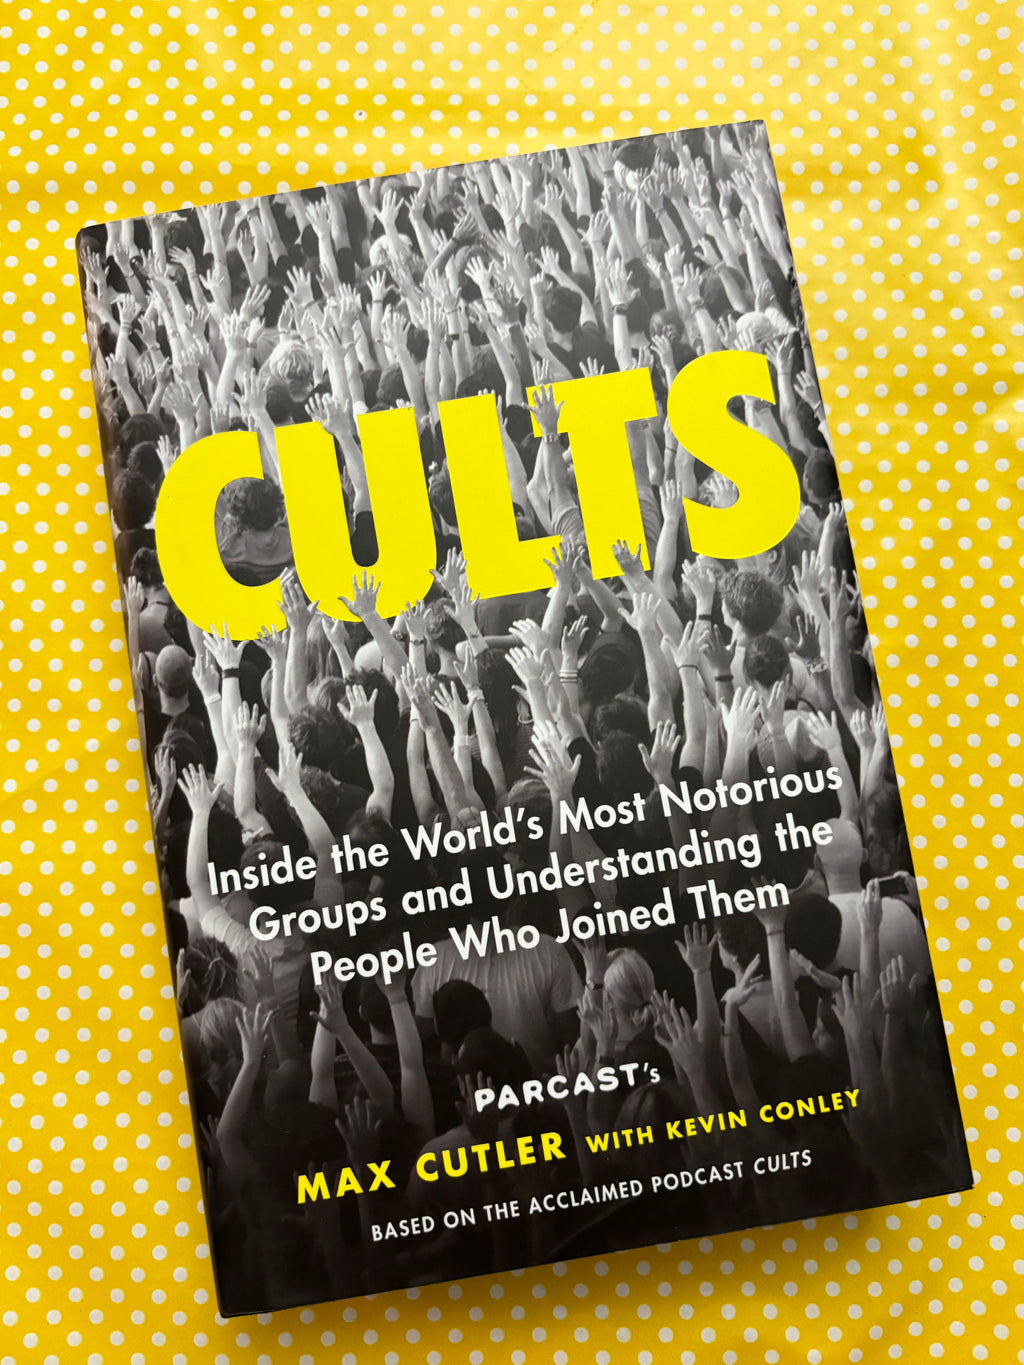 CULTS: Inside the World's Most Notorious Groups and Understanding the People Who Joined Them- By Max Cutler